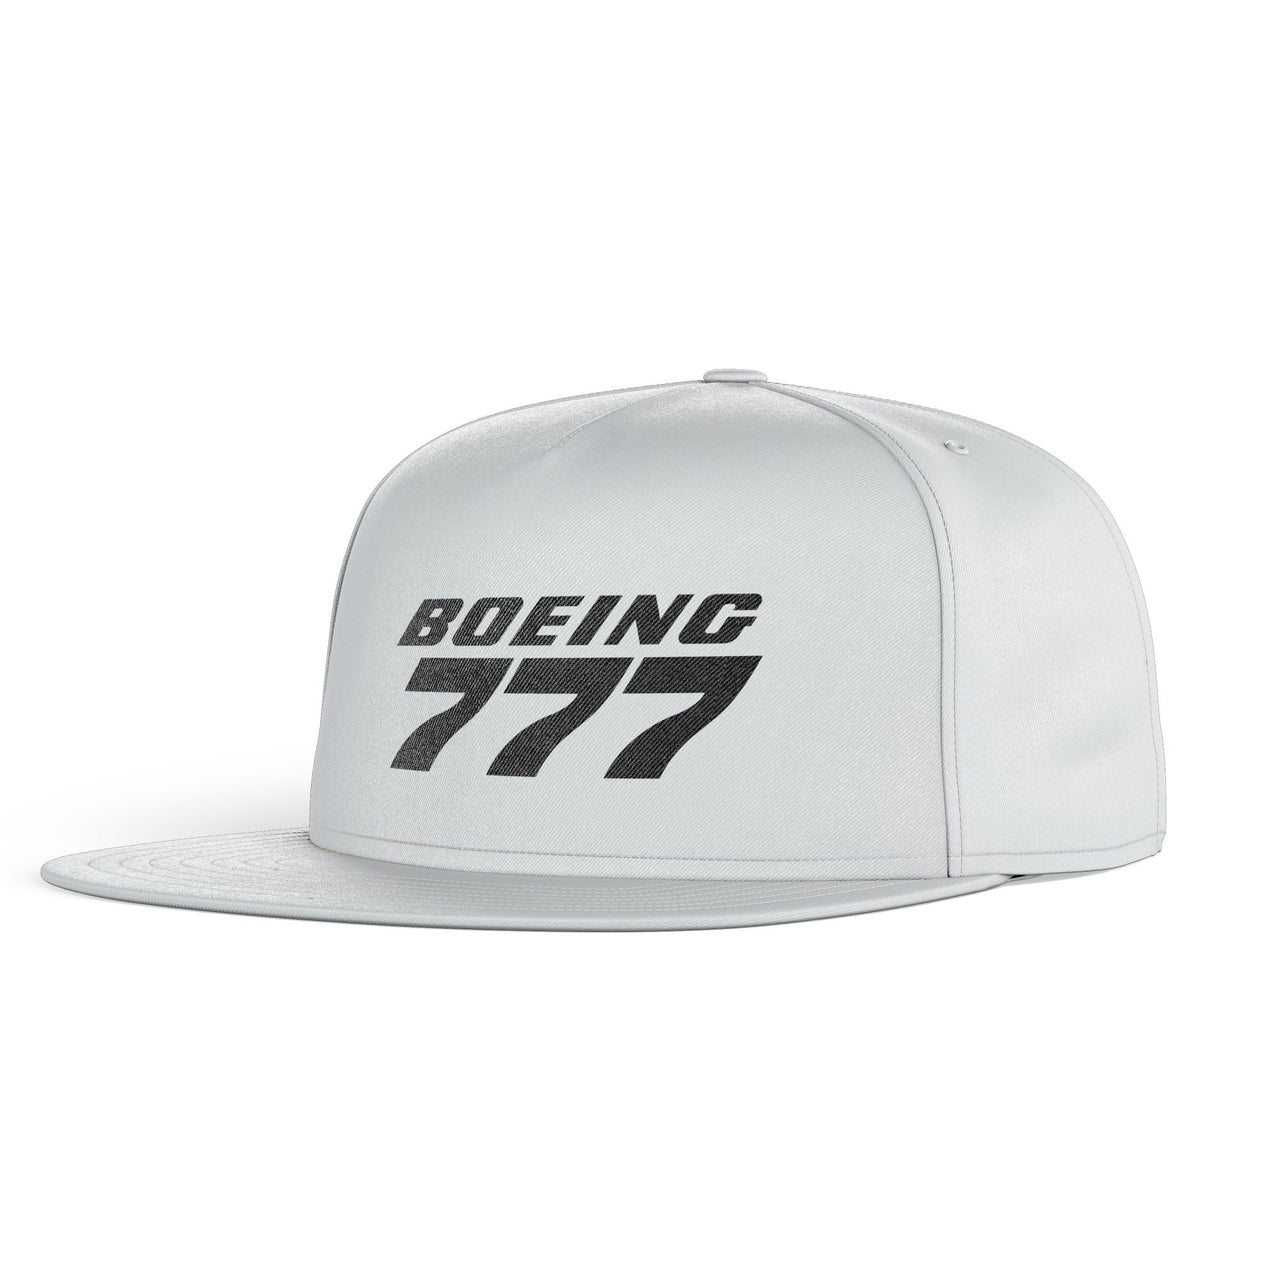 Boeing 777 & Text Designed Snapback Caps & Hats